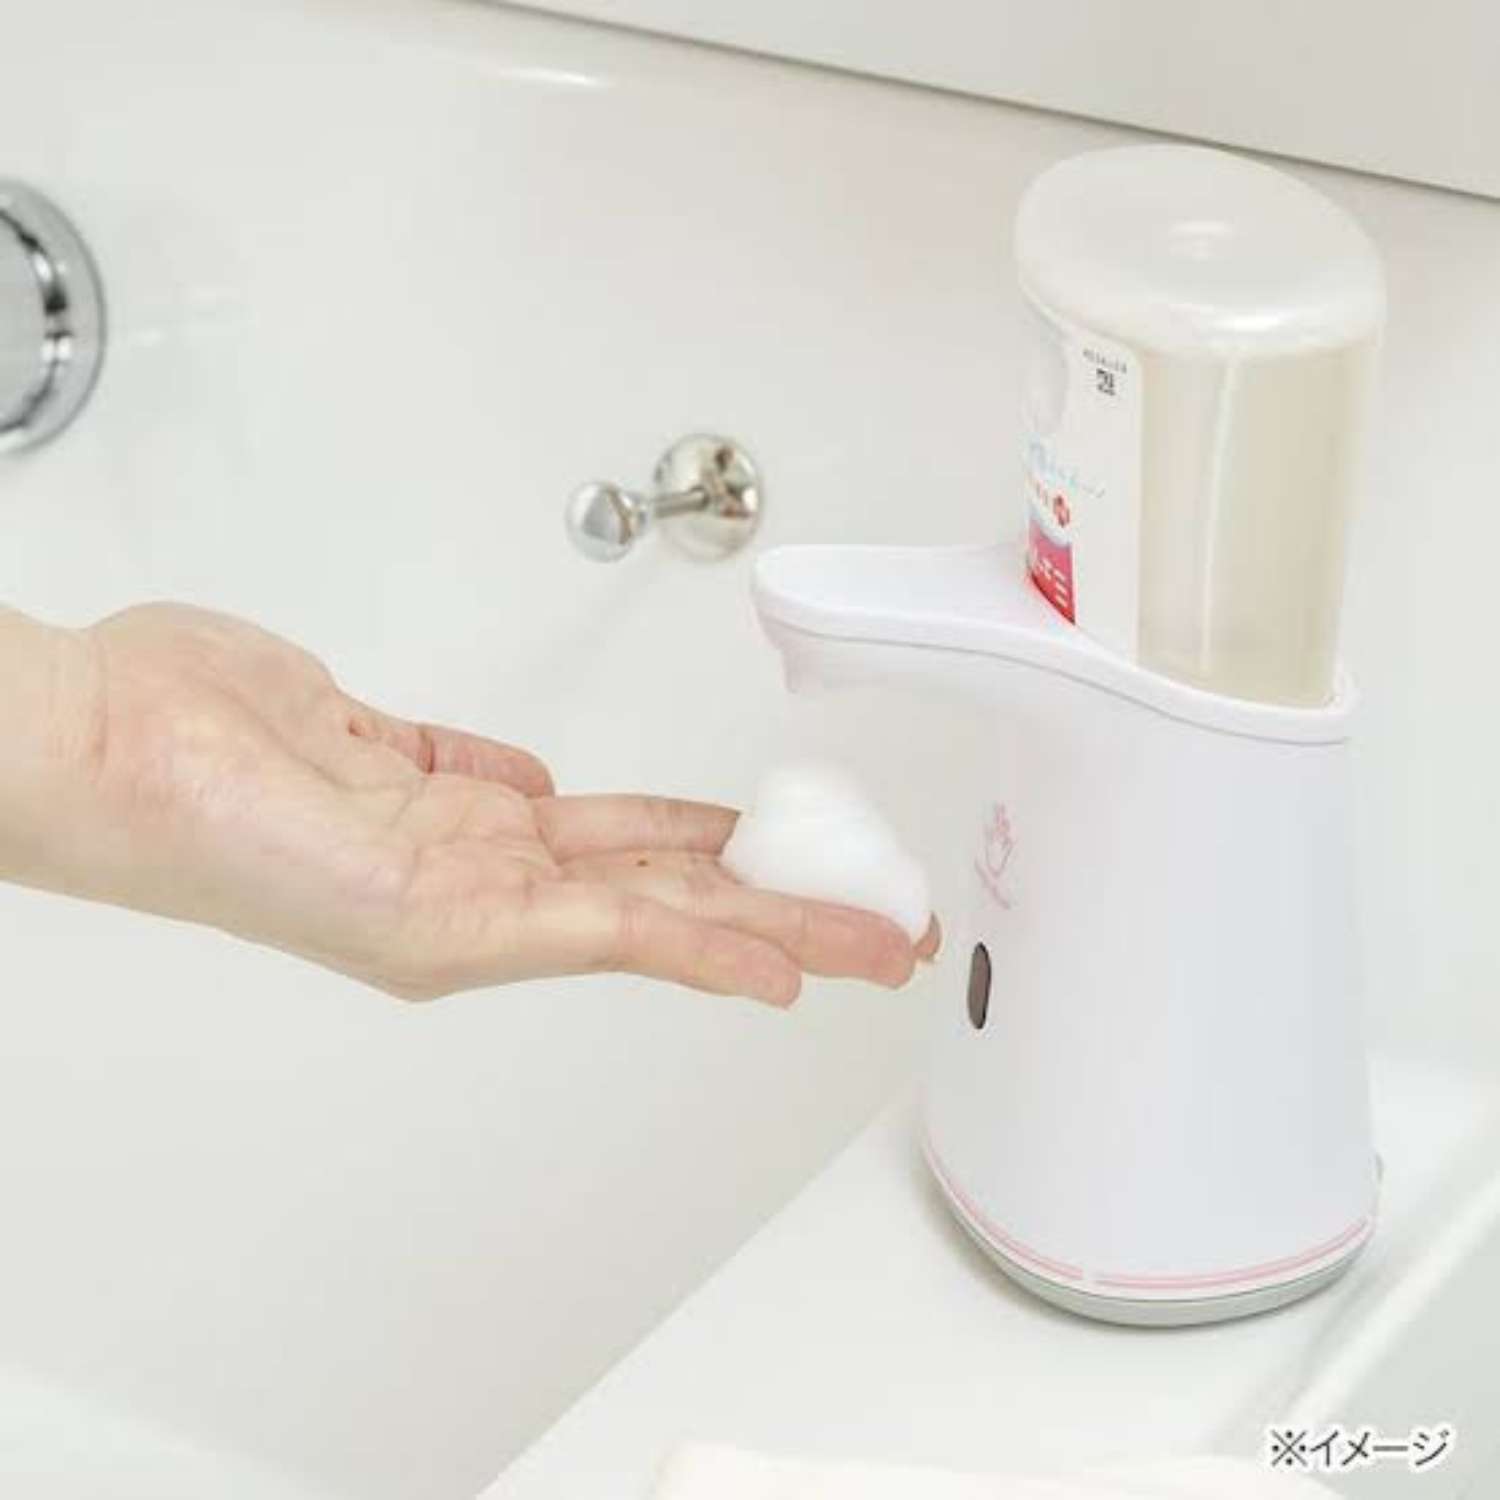 Muse Non Touch Soap Automatic Dispenser + Refill 250ml - Buy Me Japan